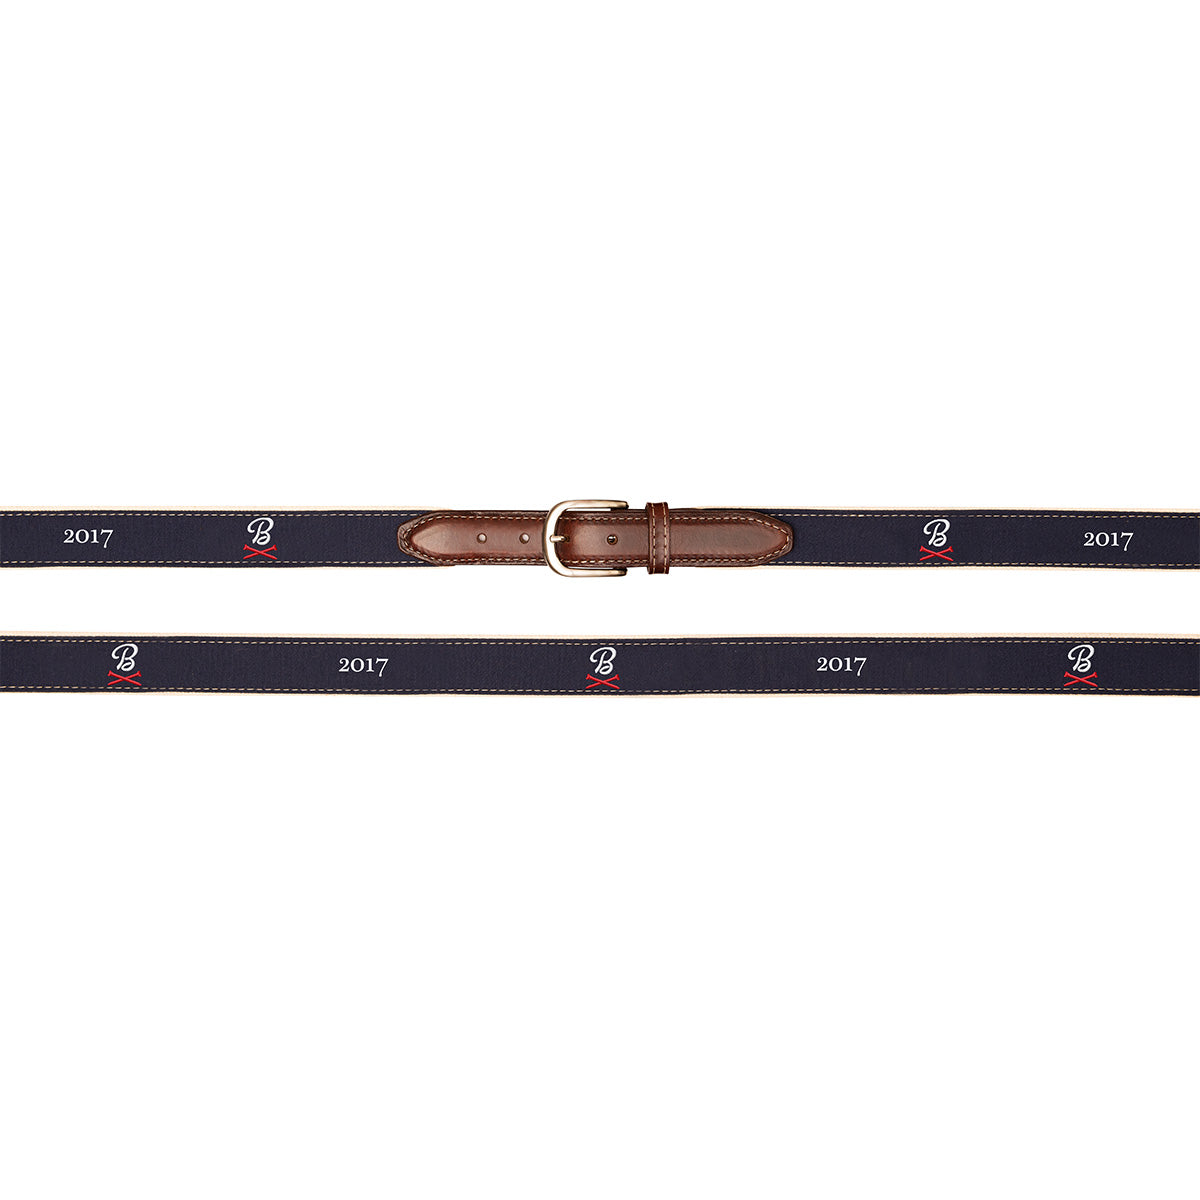 Barstool Golf Canvas Embroidered Belt-Belts-Fore Play-Navy-32-Barstool Sports